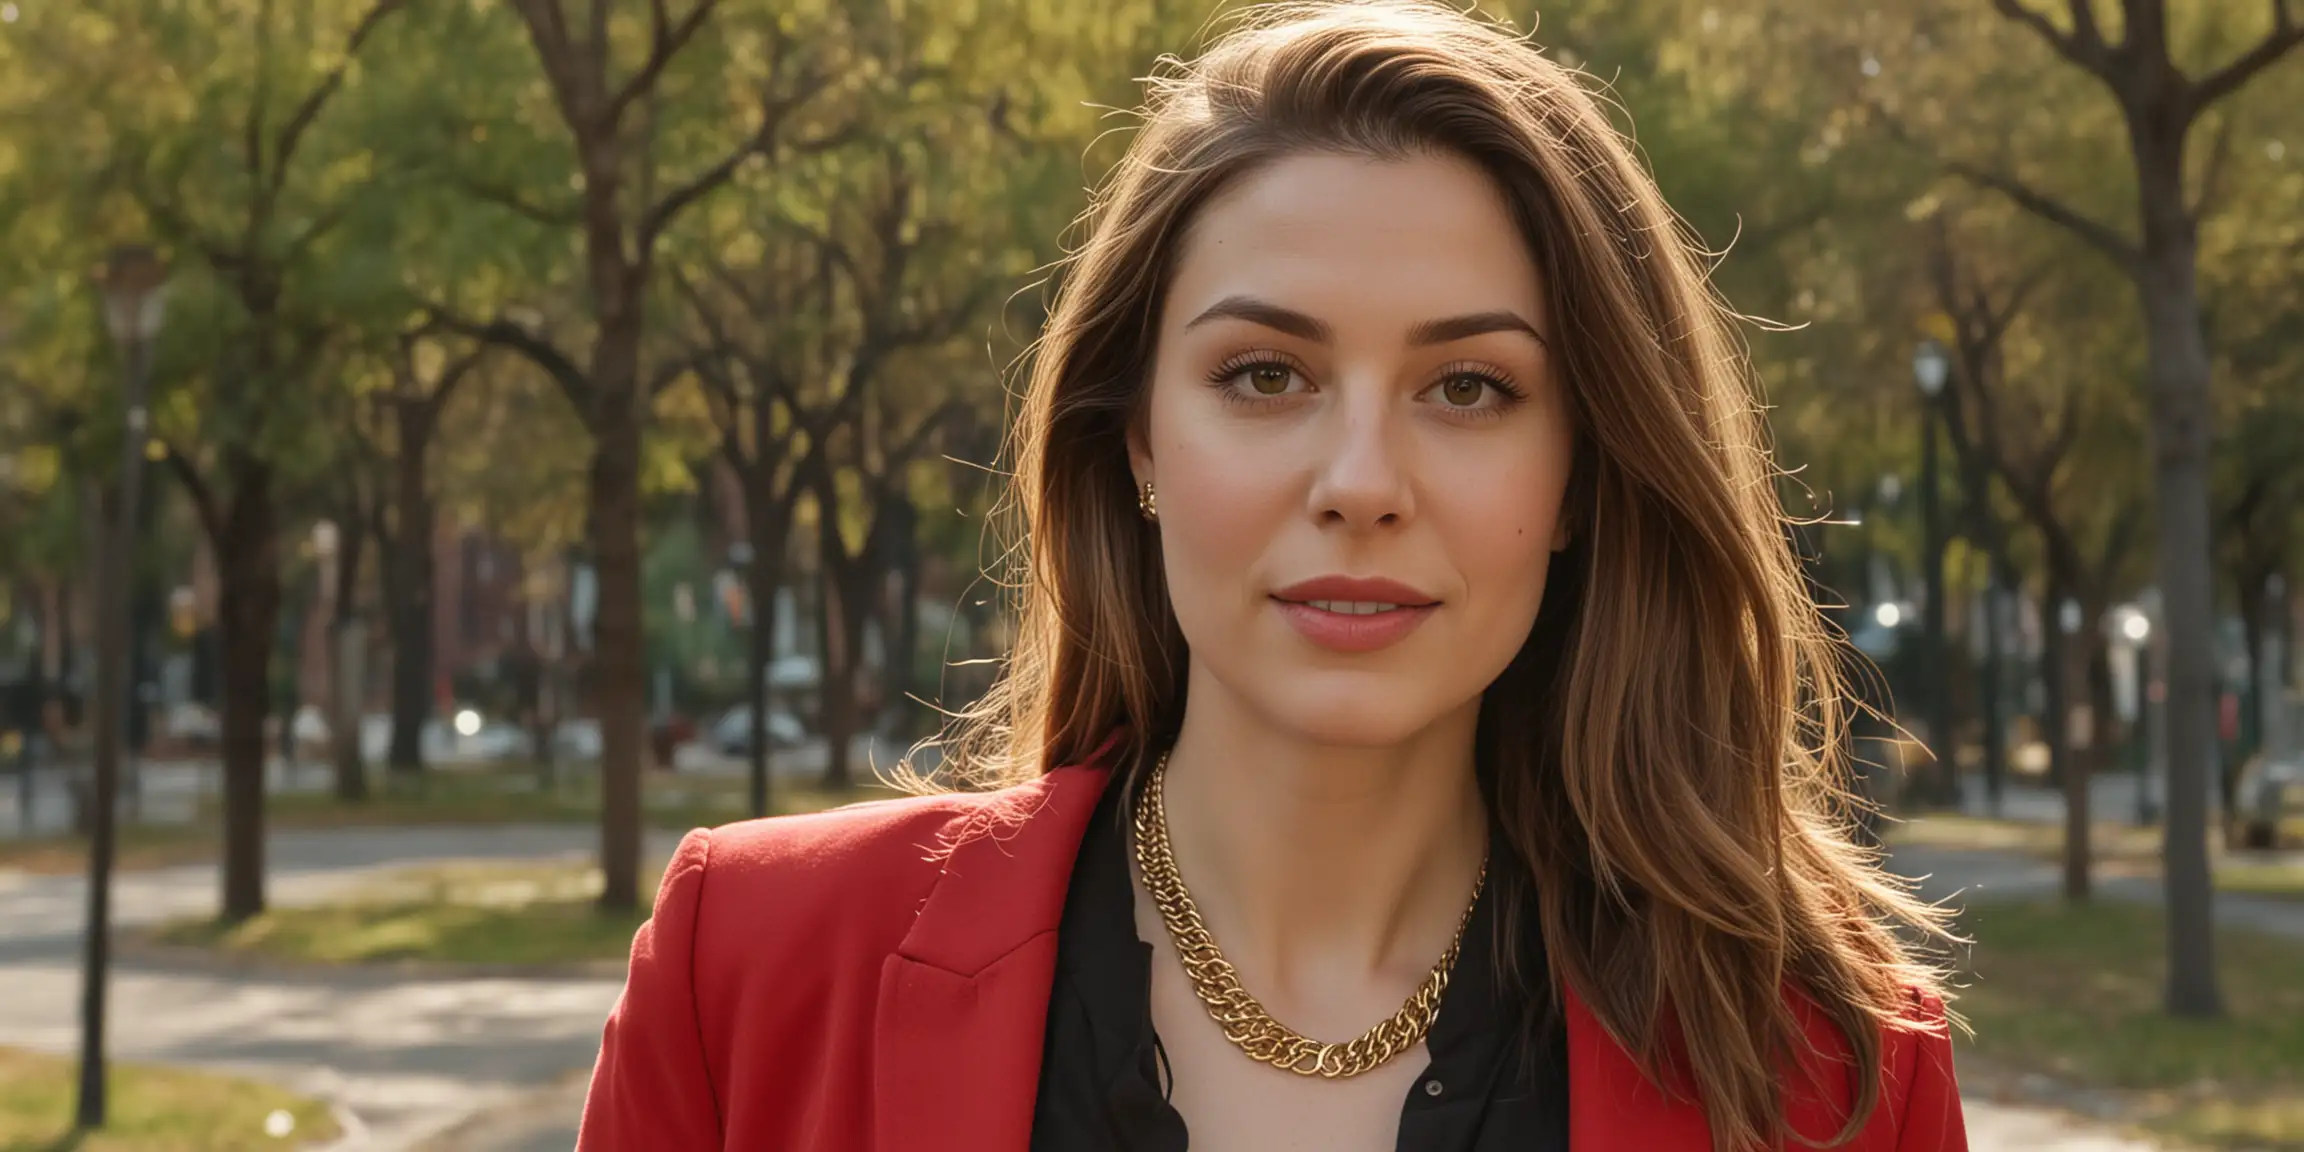 A 30-year-old pale Caucasian woman with long brown hair worn parted to the right, prominent eyelashes, wearing a red blazer, a gold necklace, a black shirt, and black pants, set in an urban park